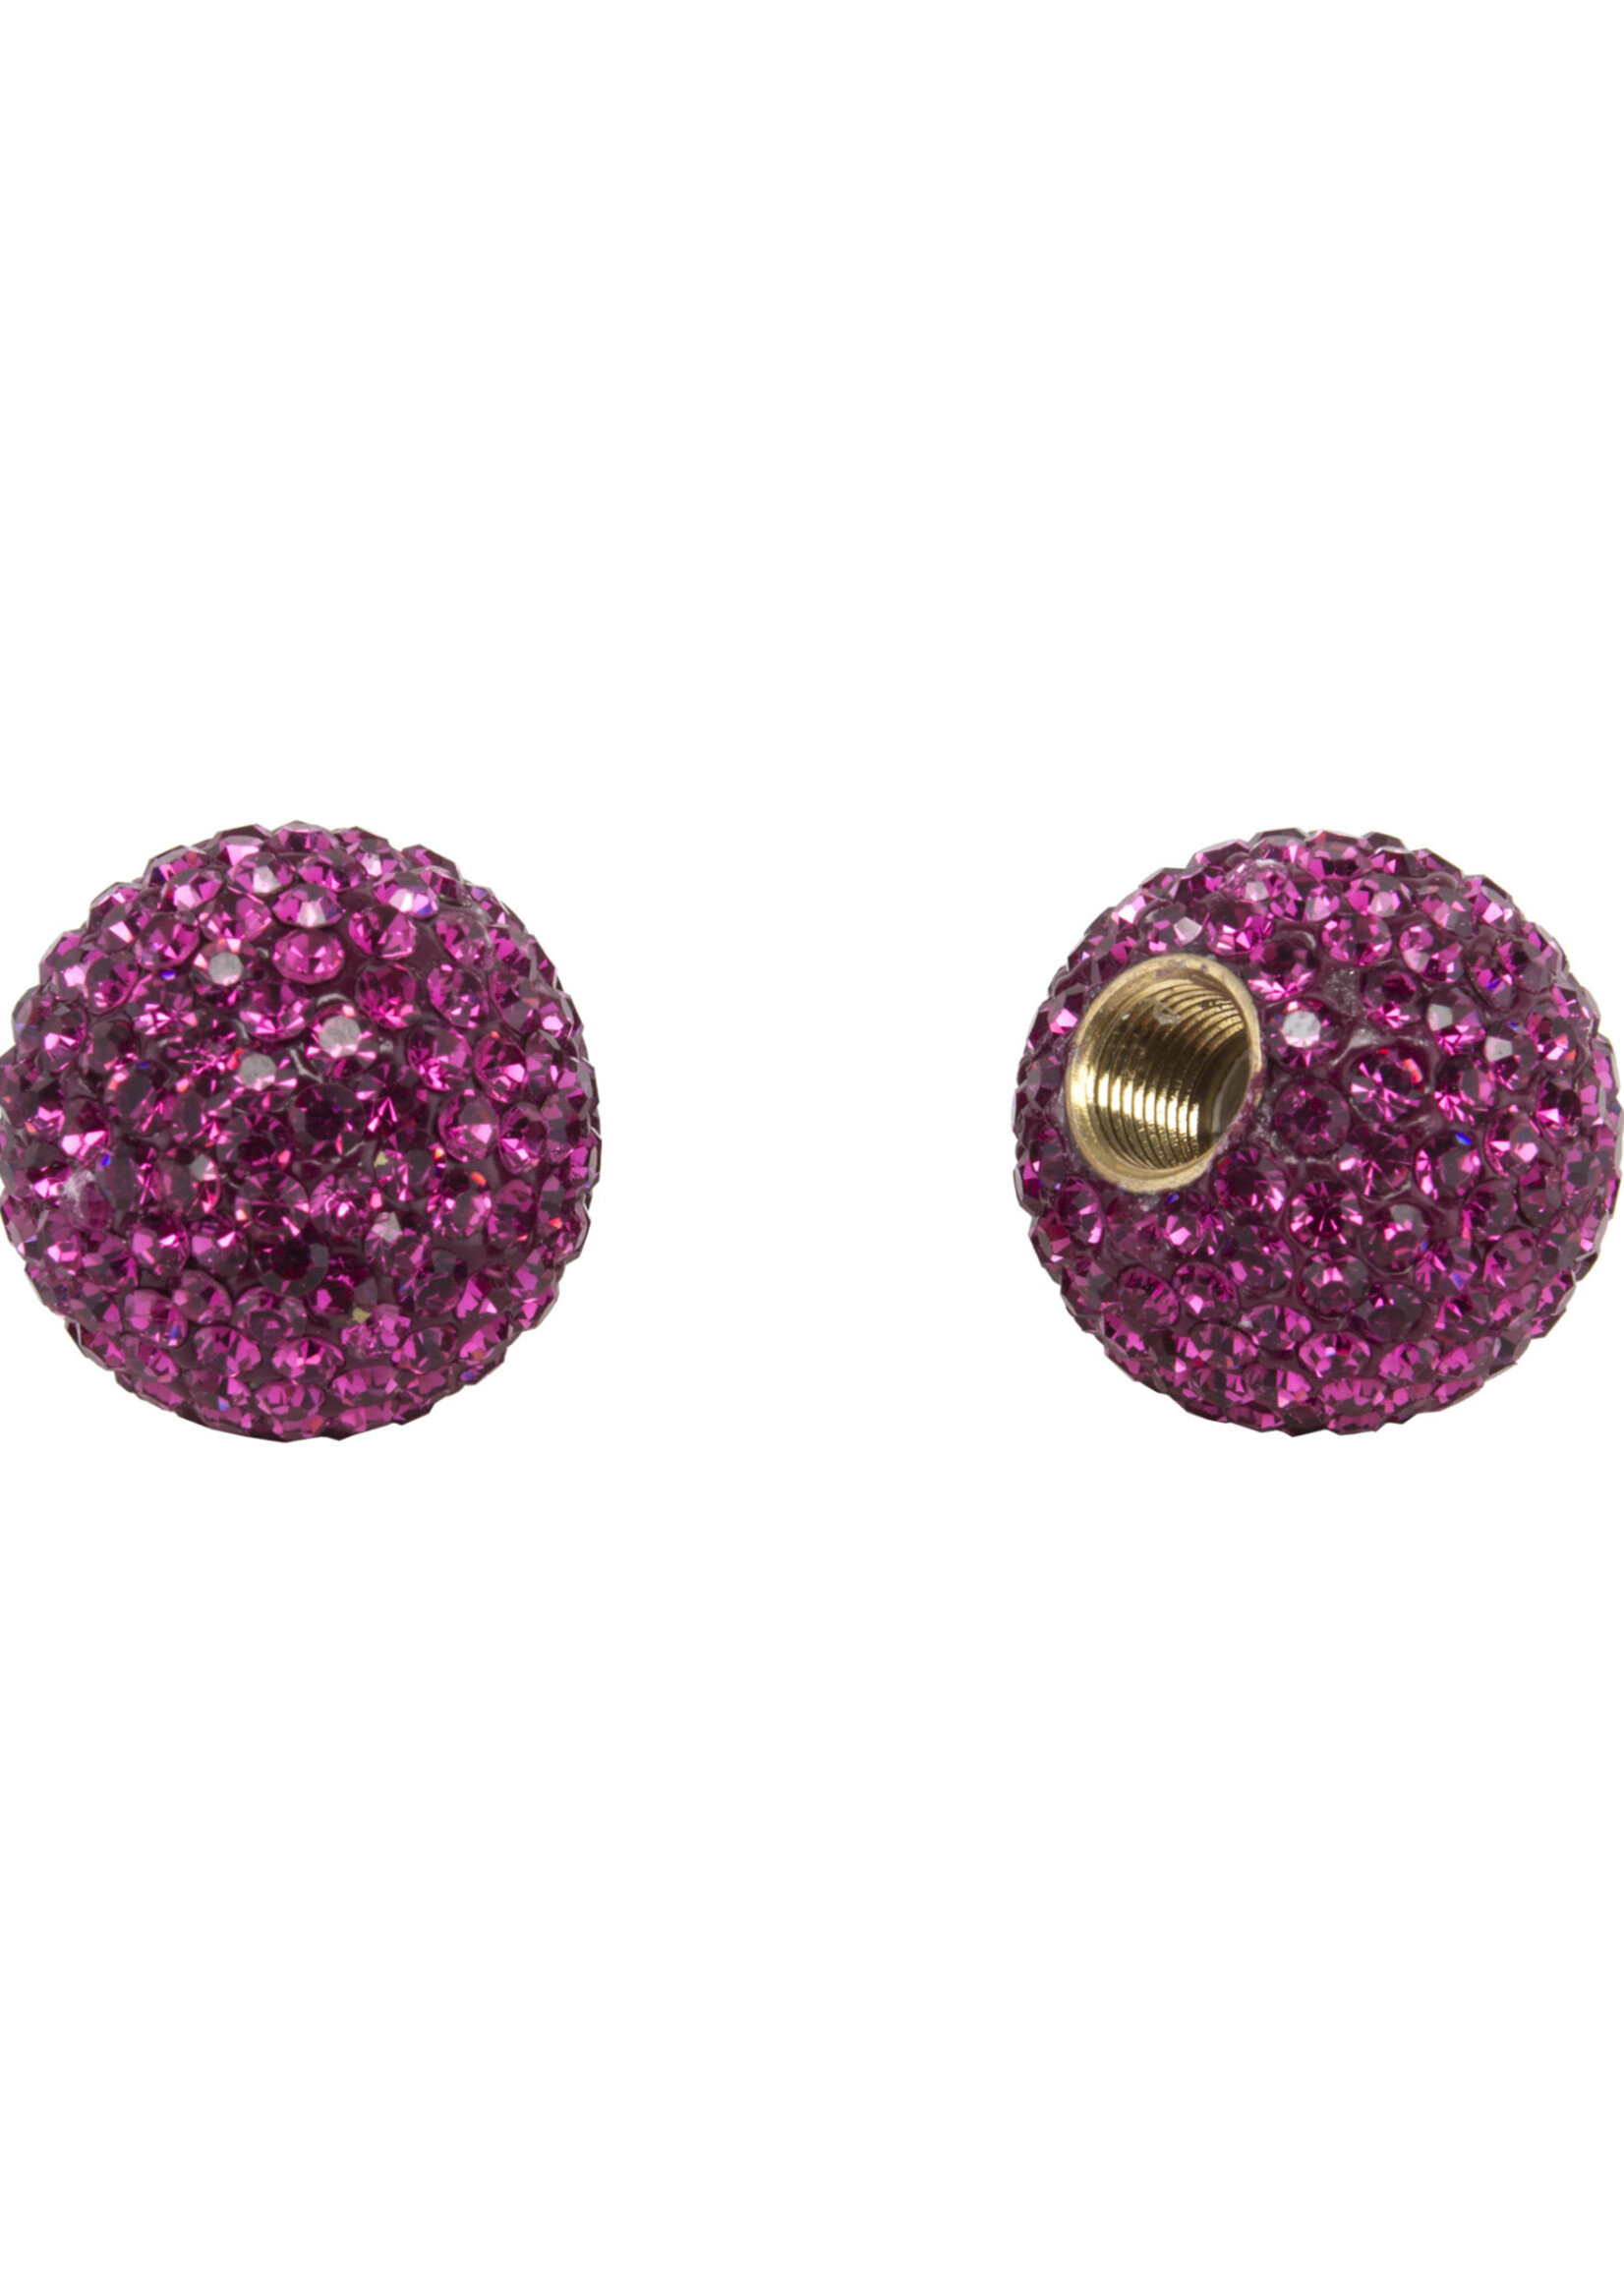 CRUISER CANDY VALVE CAPS C-CANDY BLING CRYSTAL FUCSIA